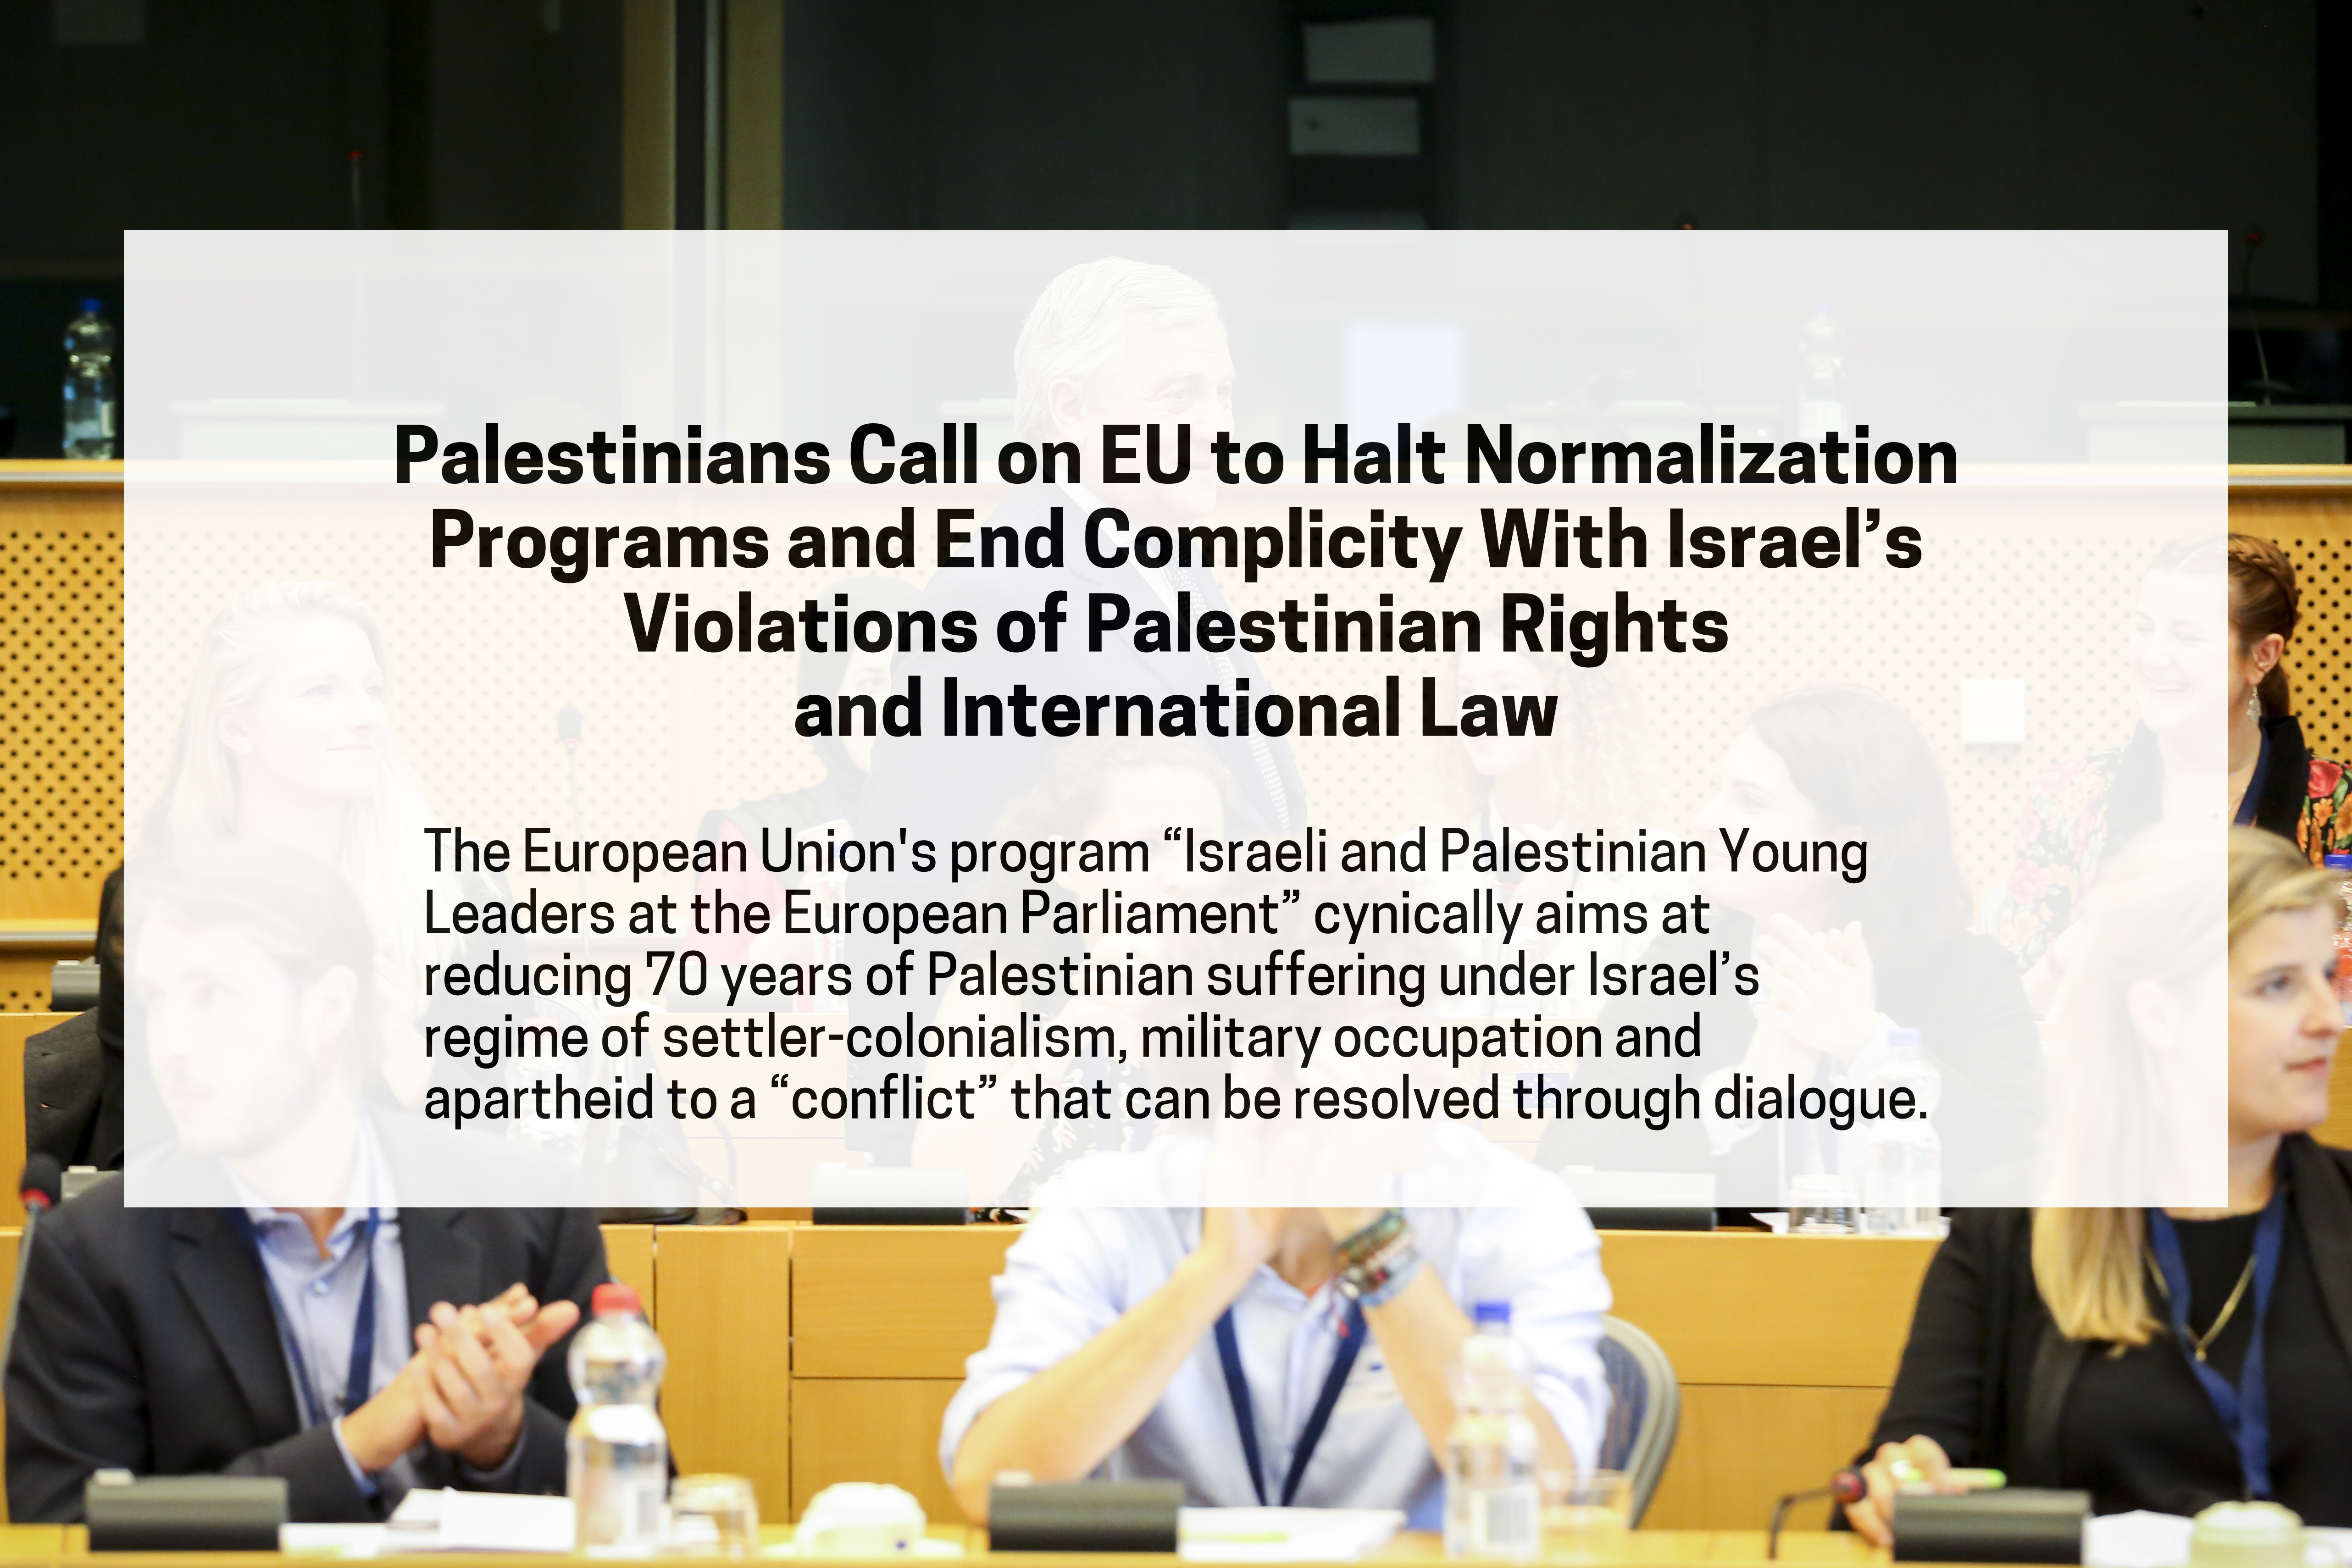 Palestinians Call on EU to Halt Normalization Programs and End Complicity With Israel’s Violations of Palestinian Rights and International Law